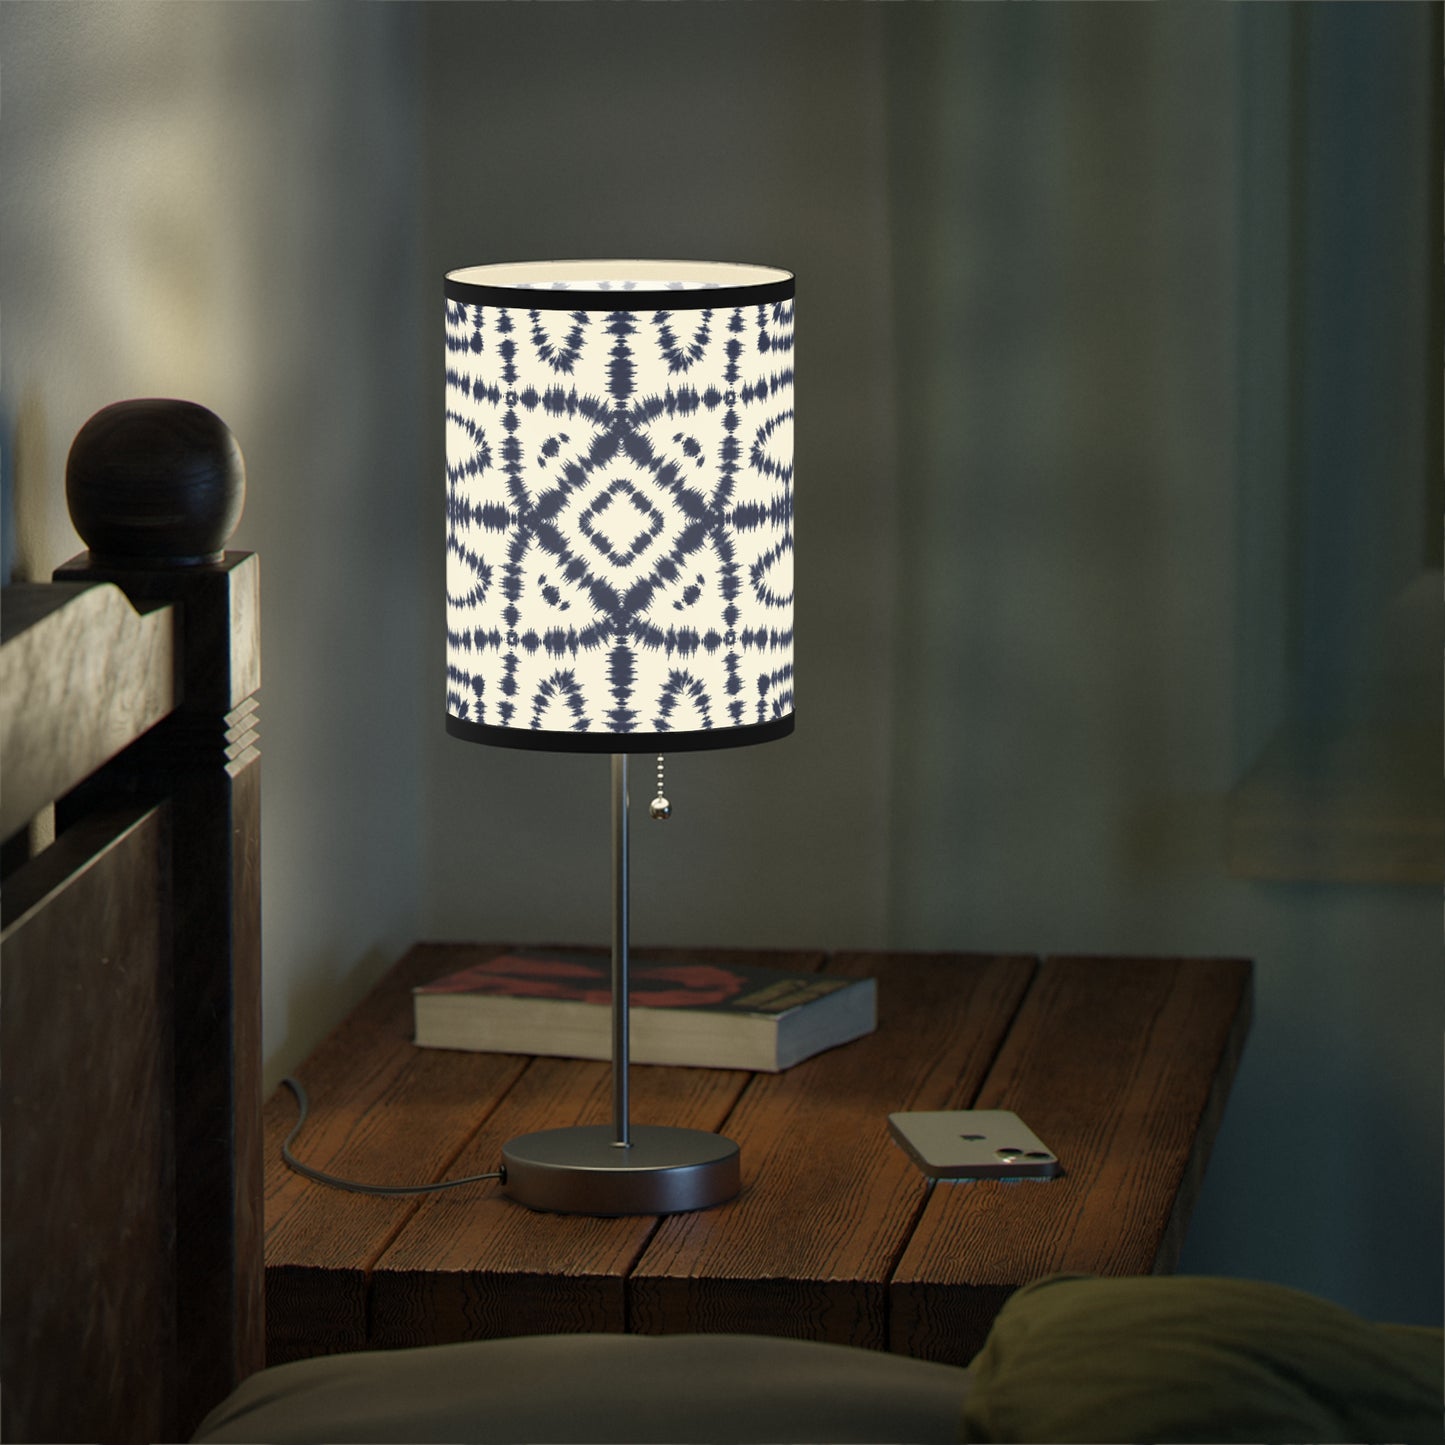 White and Navy Batik - Lamp on a Stand, US|CA plug